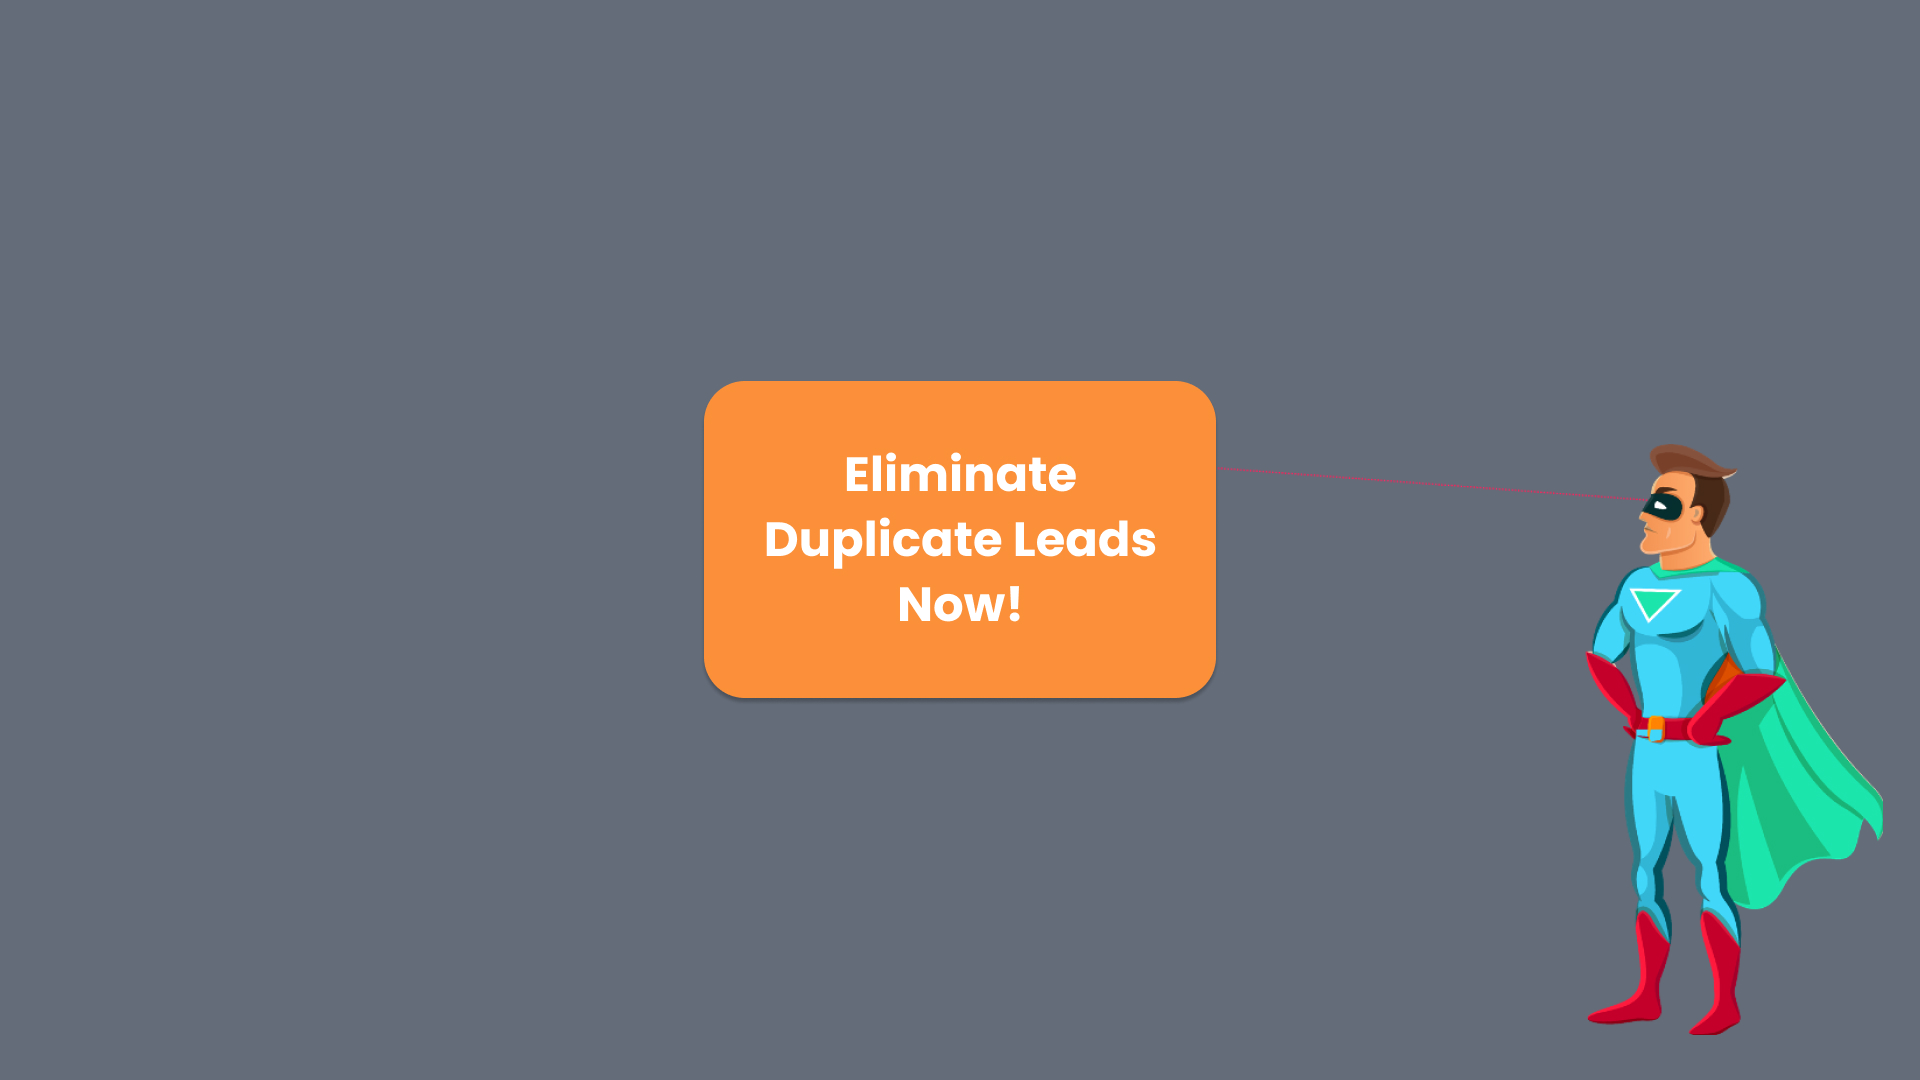 End users can download this Delpha conversation to get superpowers to eliminate duplicate leads inside Salesforce.